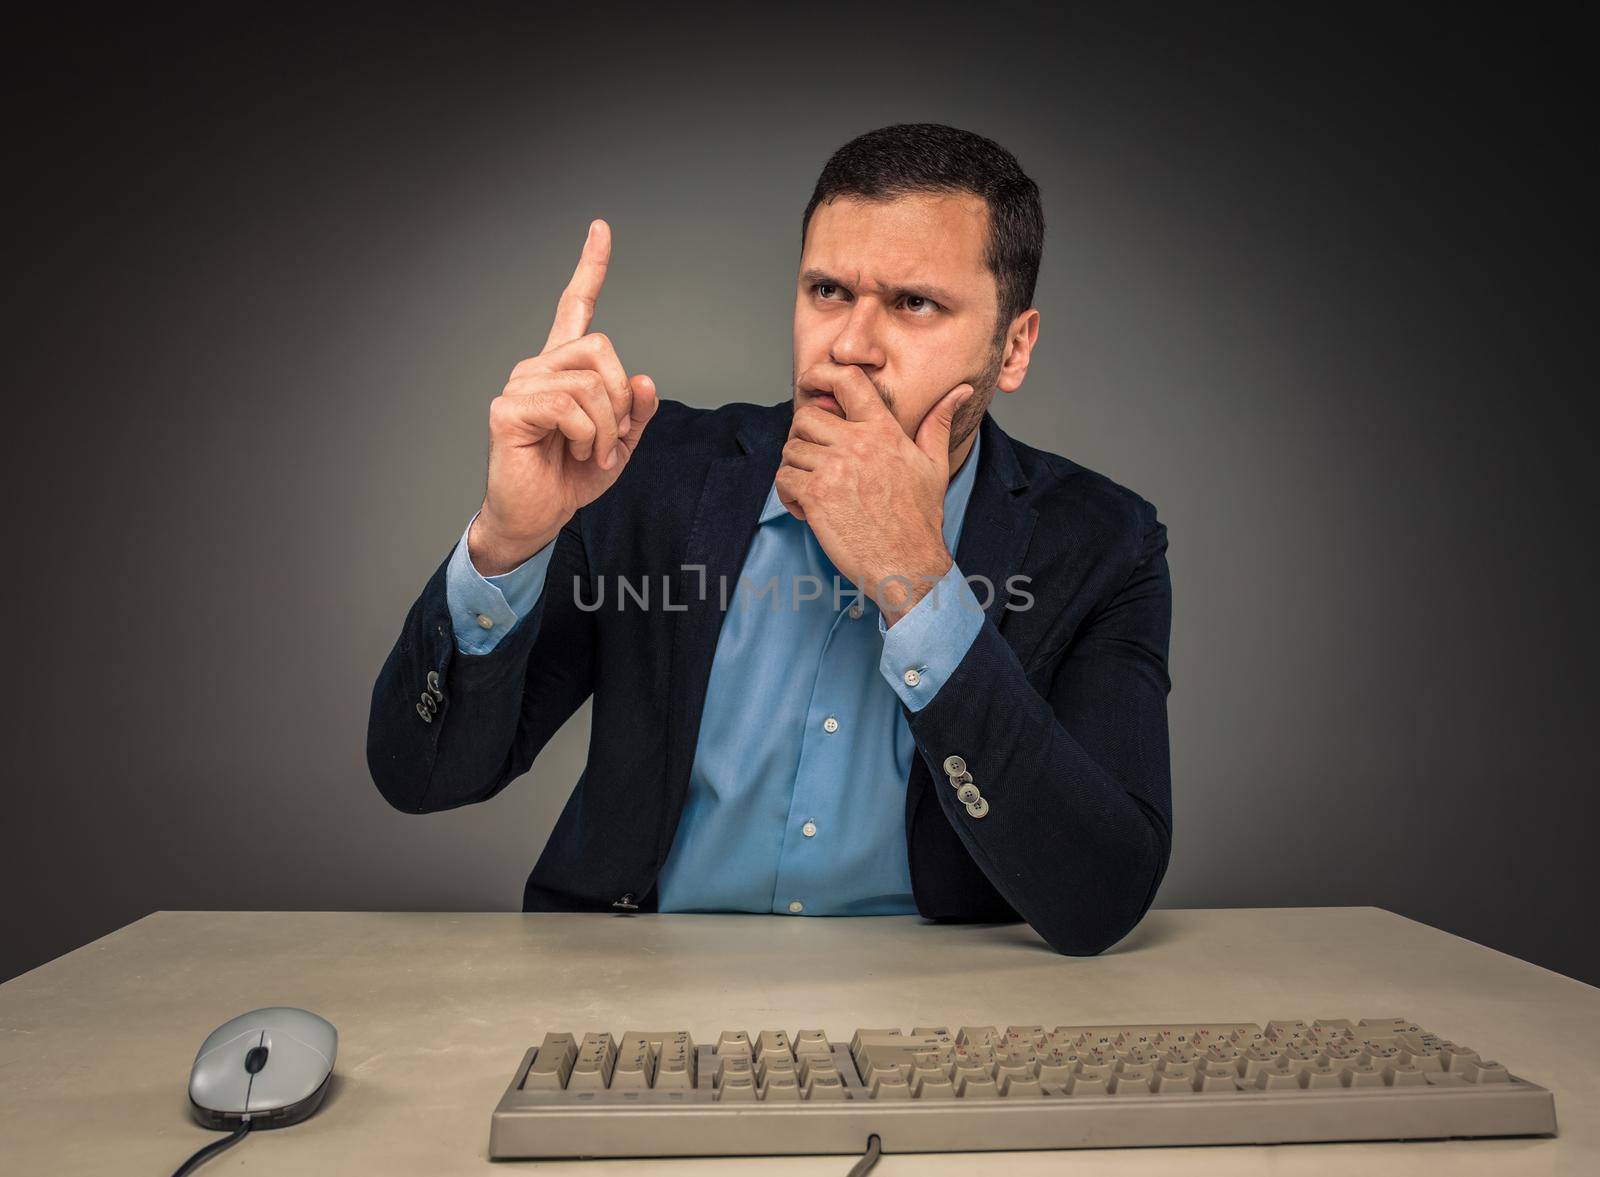 Handsome man raised his index finger and looking at the camera, sitting at a desk near a computer, isolated on gray background. Concept of the idea or warning